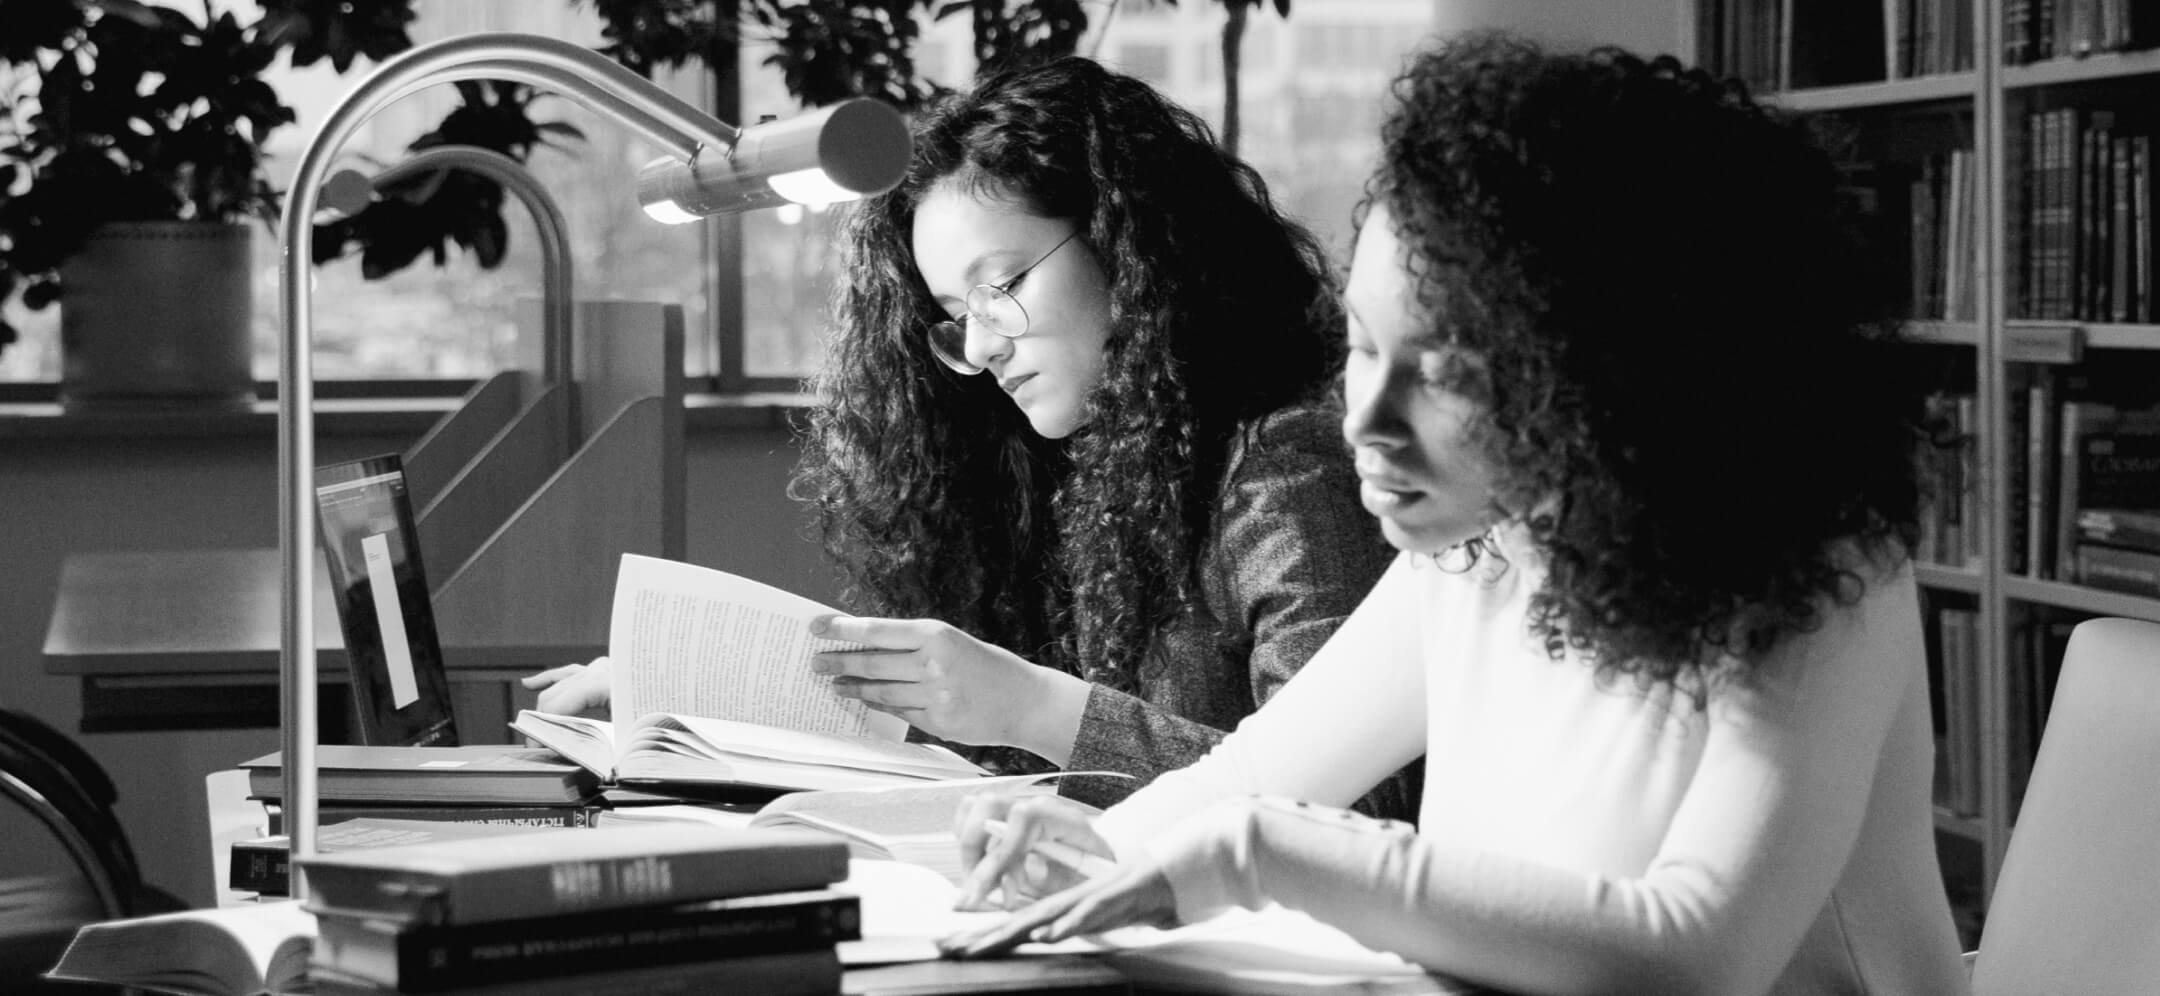 Two students research at a library